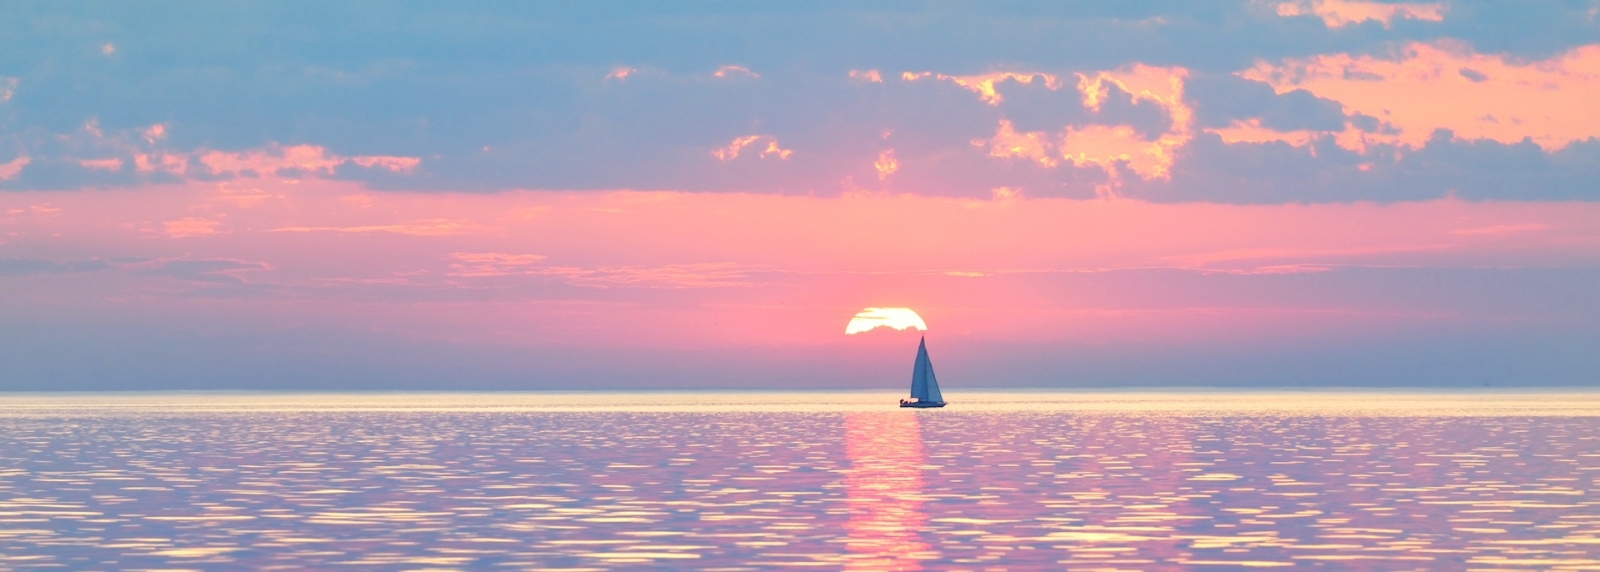 Sloop rigged yacht sailing in an open Baltic sea at sunset